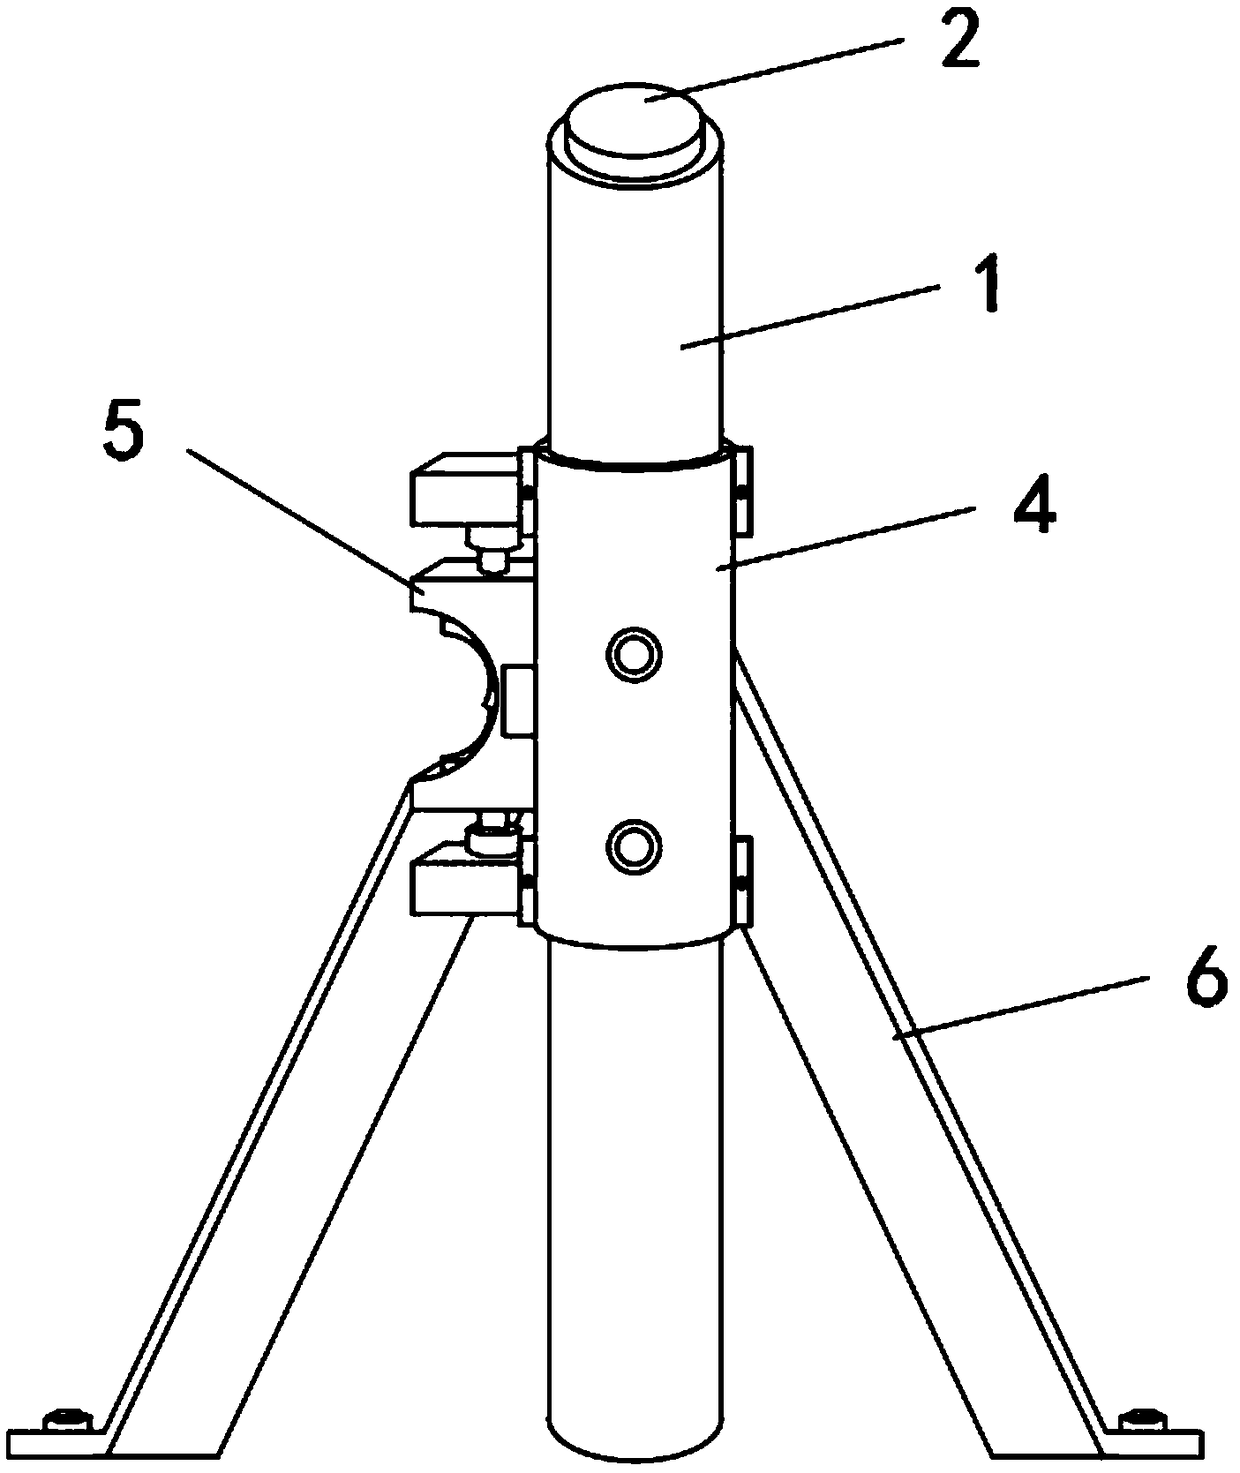 Re-jacking reinforcing structure for post-cast belt cantilever and construction method of structure